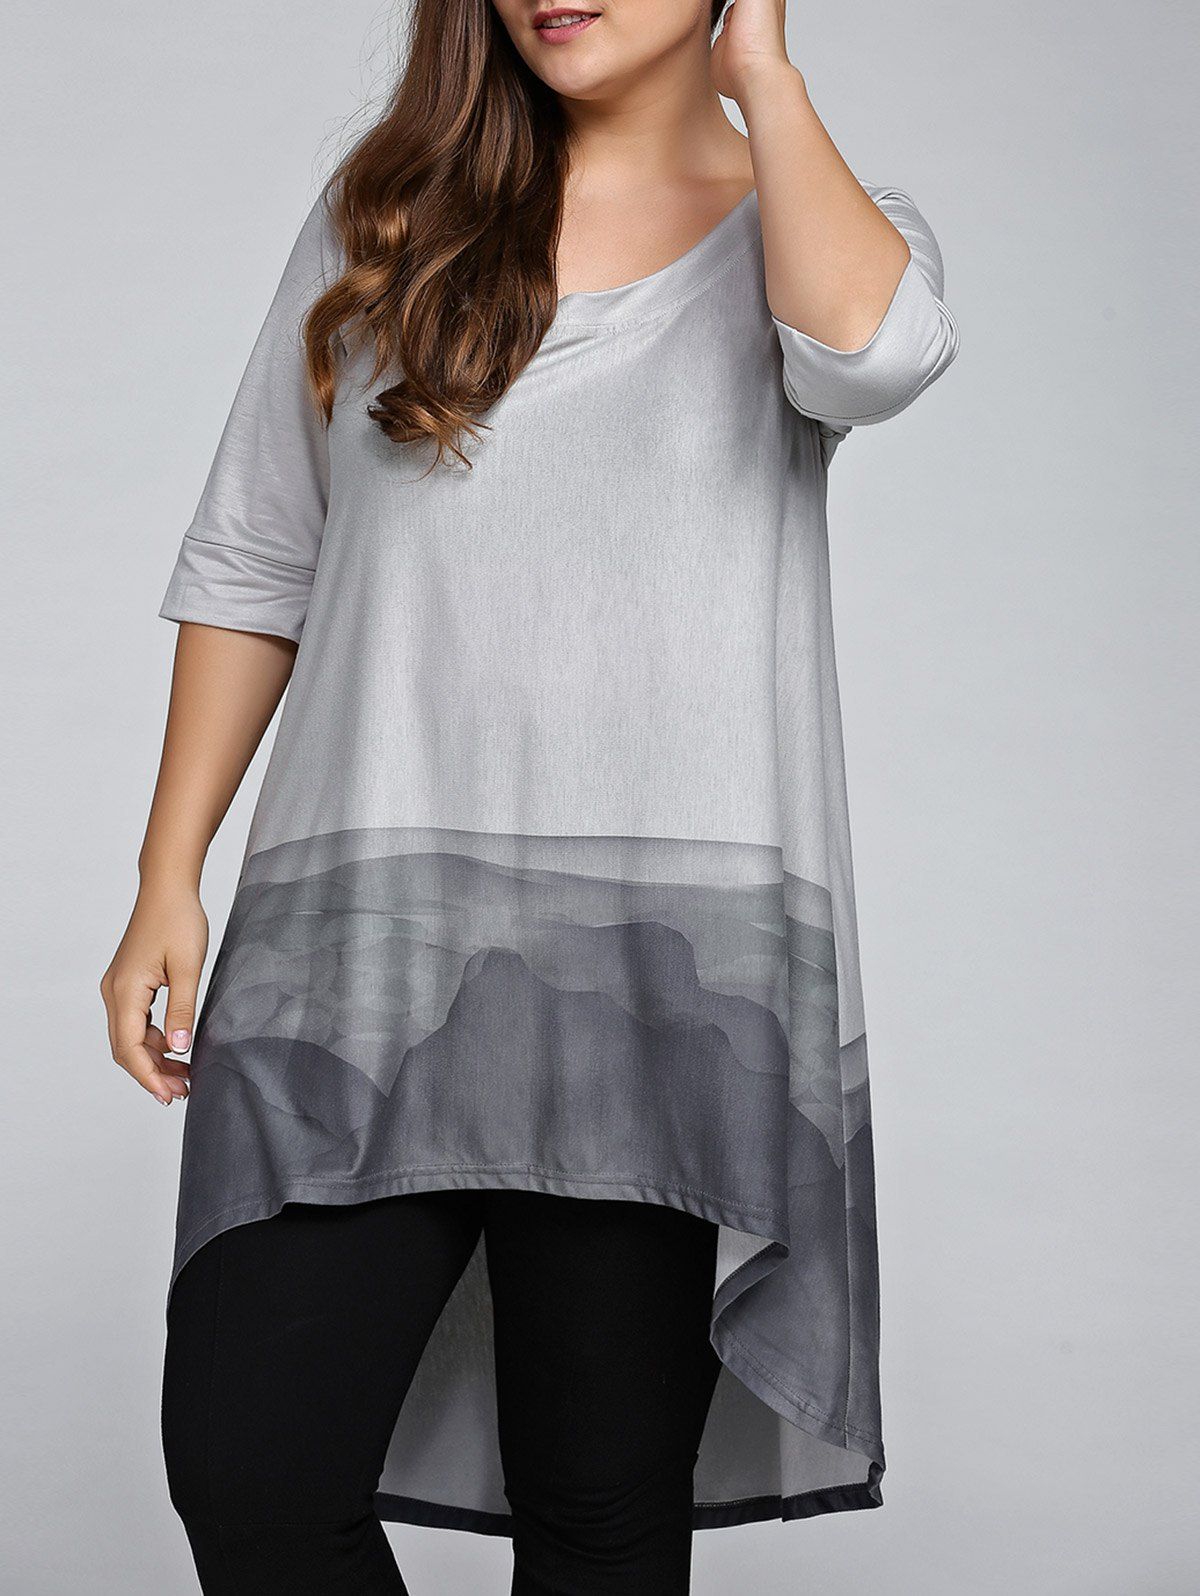 [17% OFF] 2021 Plus Size 3/4 Sleeve Printed High Low T-Shirt In GRAY ...